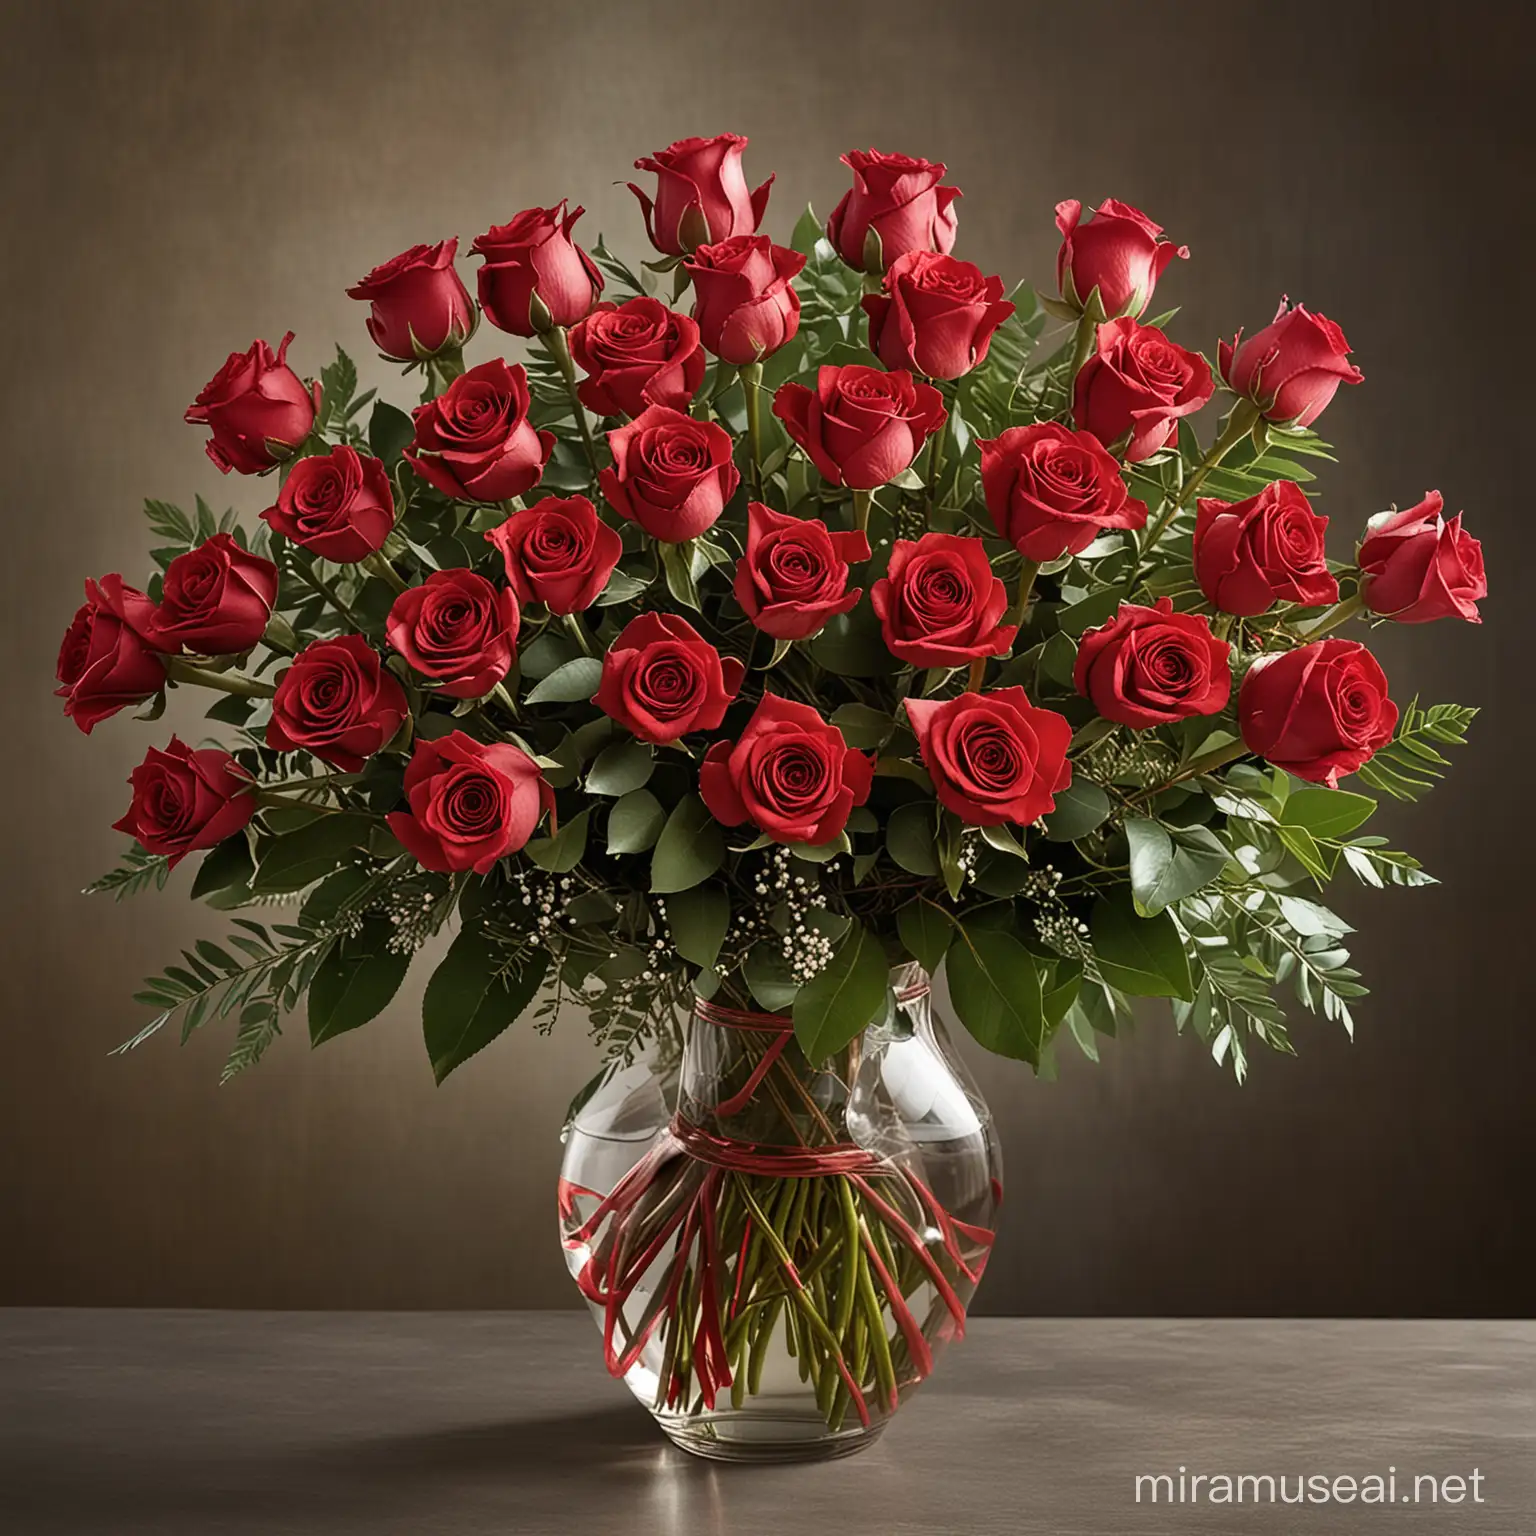 Create a vivid scene where a florist meticulously crafts a radiant bouquet of crimson roses, each bloom symbolizing a different facet of passion or emotion